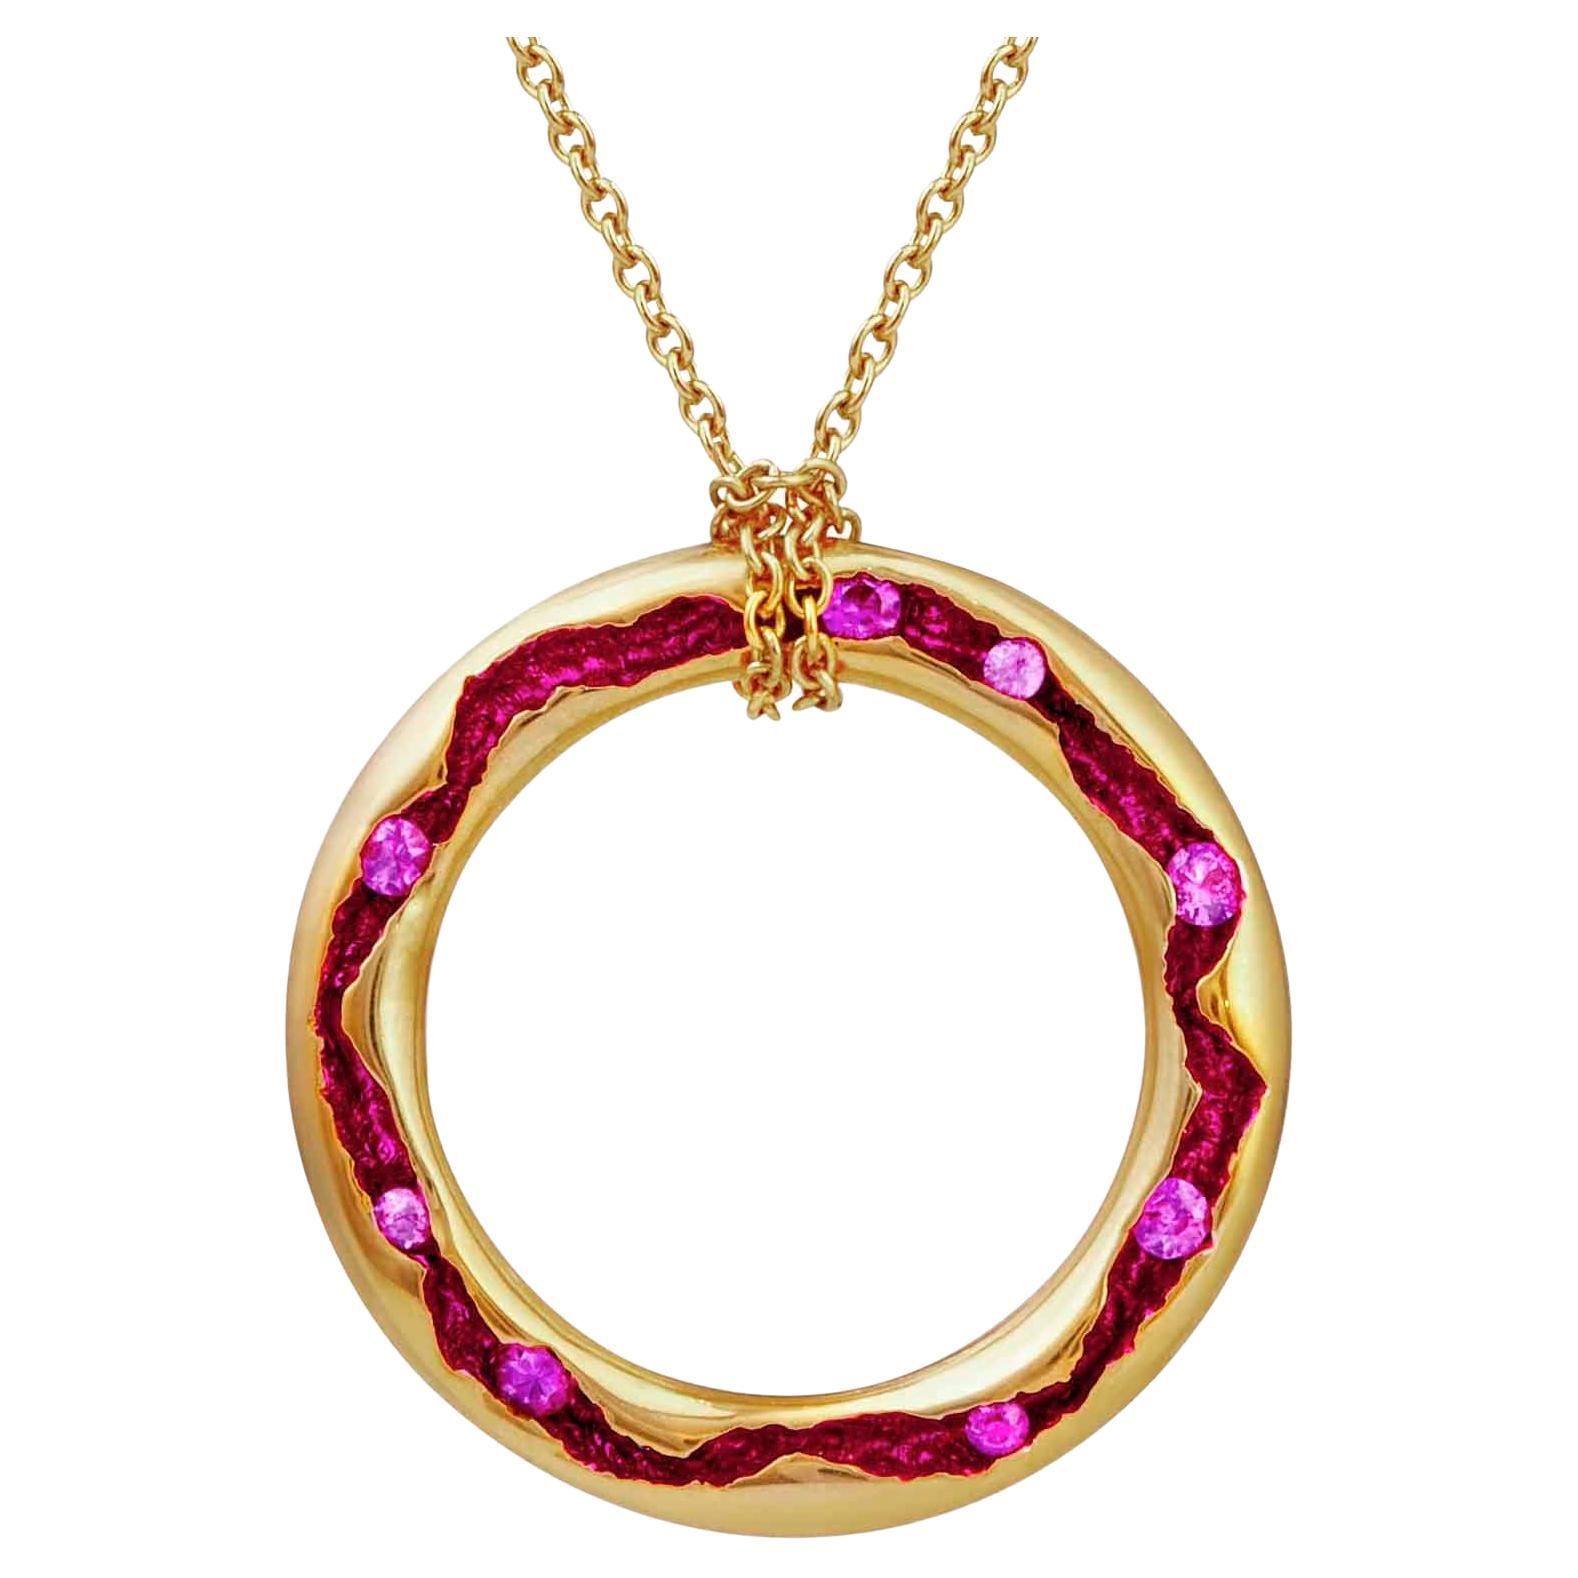 Rock Pool Large Fuchsia Pink Sapphire Necklace 18ct Yellow Gold